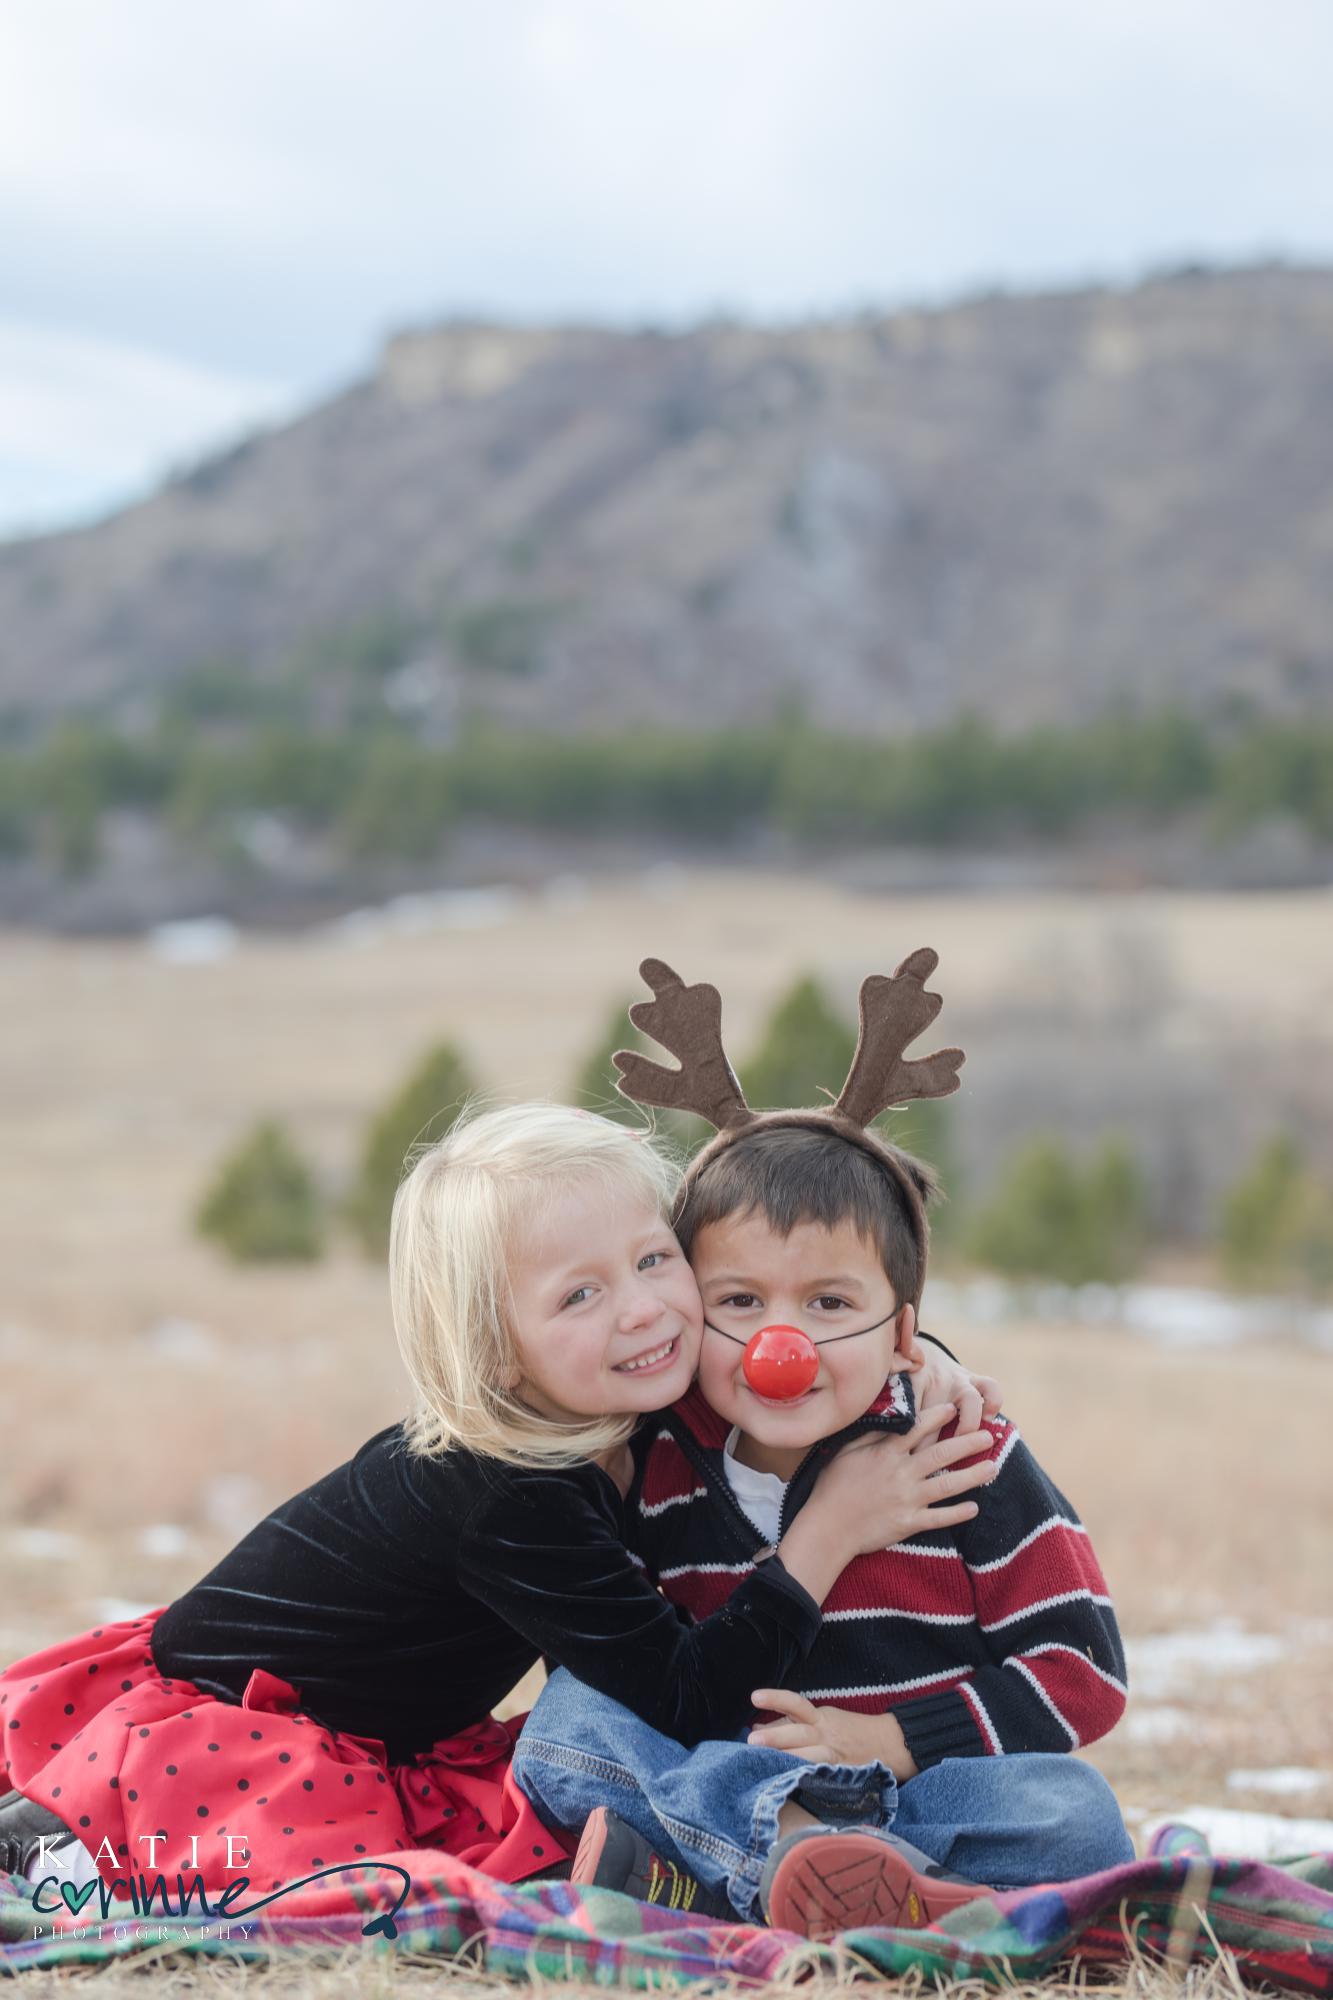 siblings make funny poses in Christmas attire